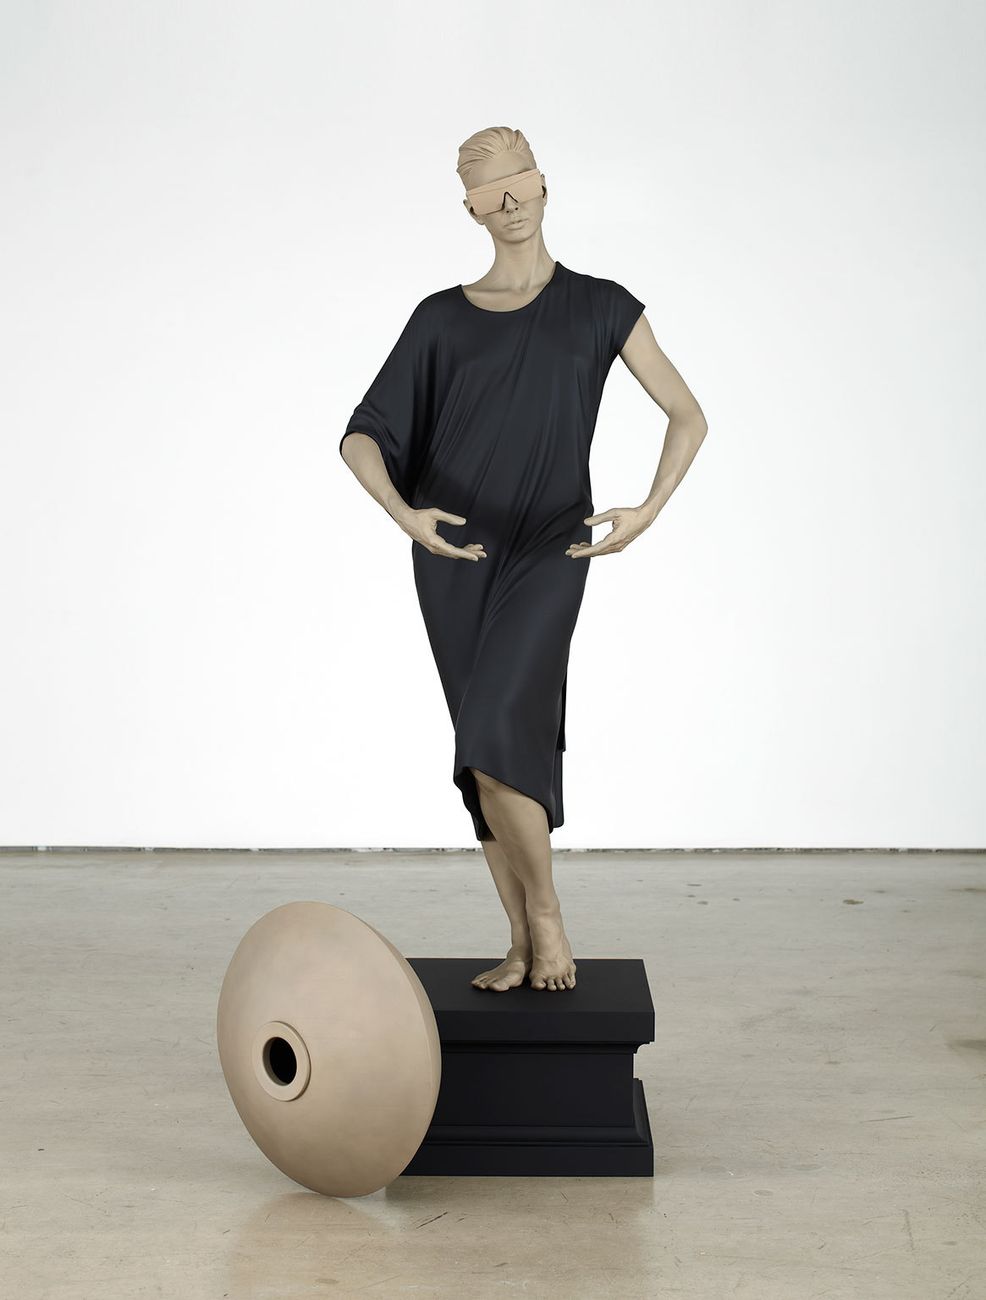 Frank Benson, Human Statue (Jessie), 2011 [Rubell Family Collection]